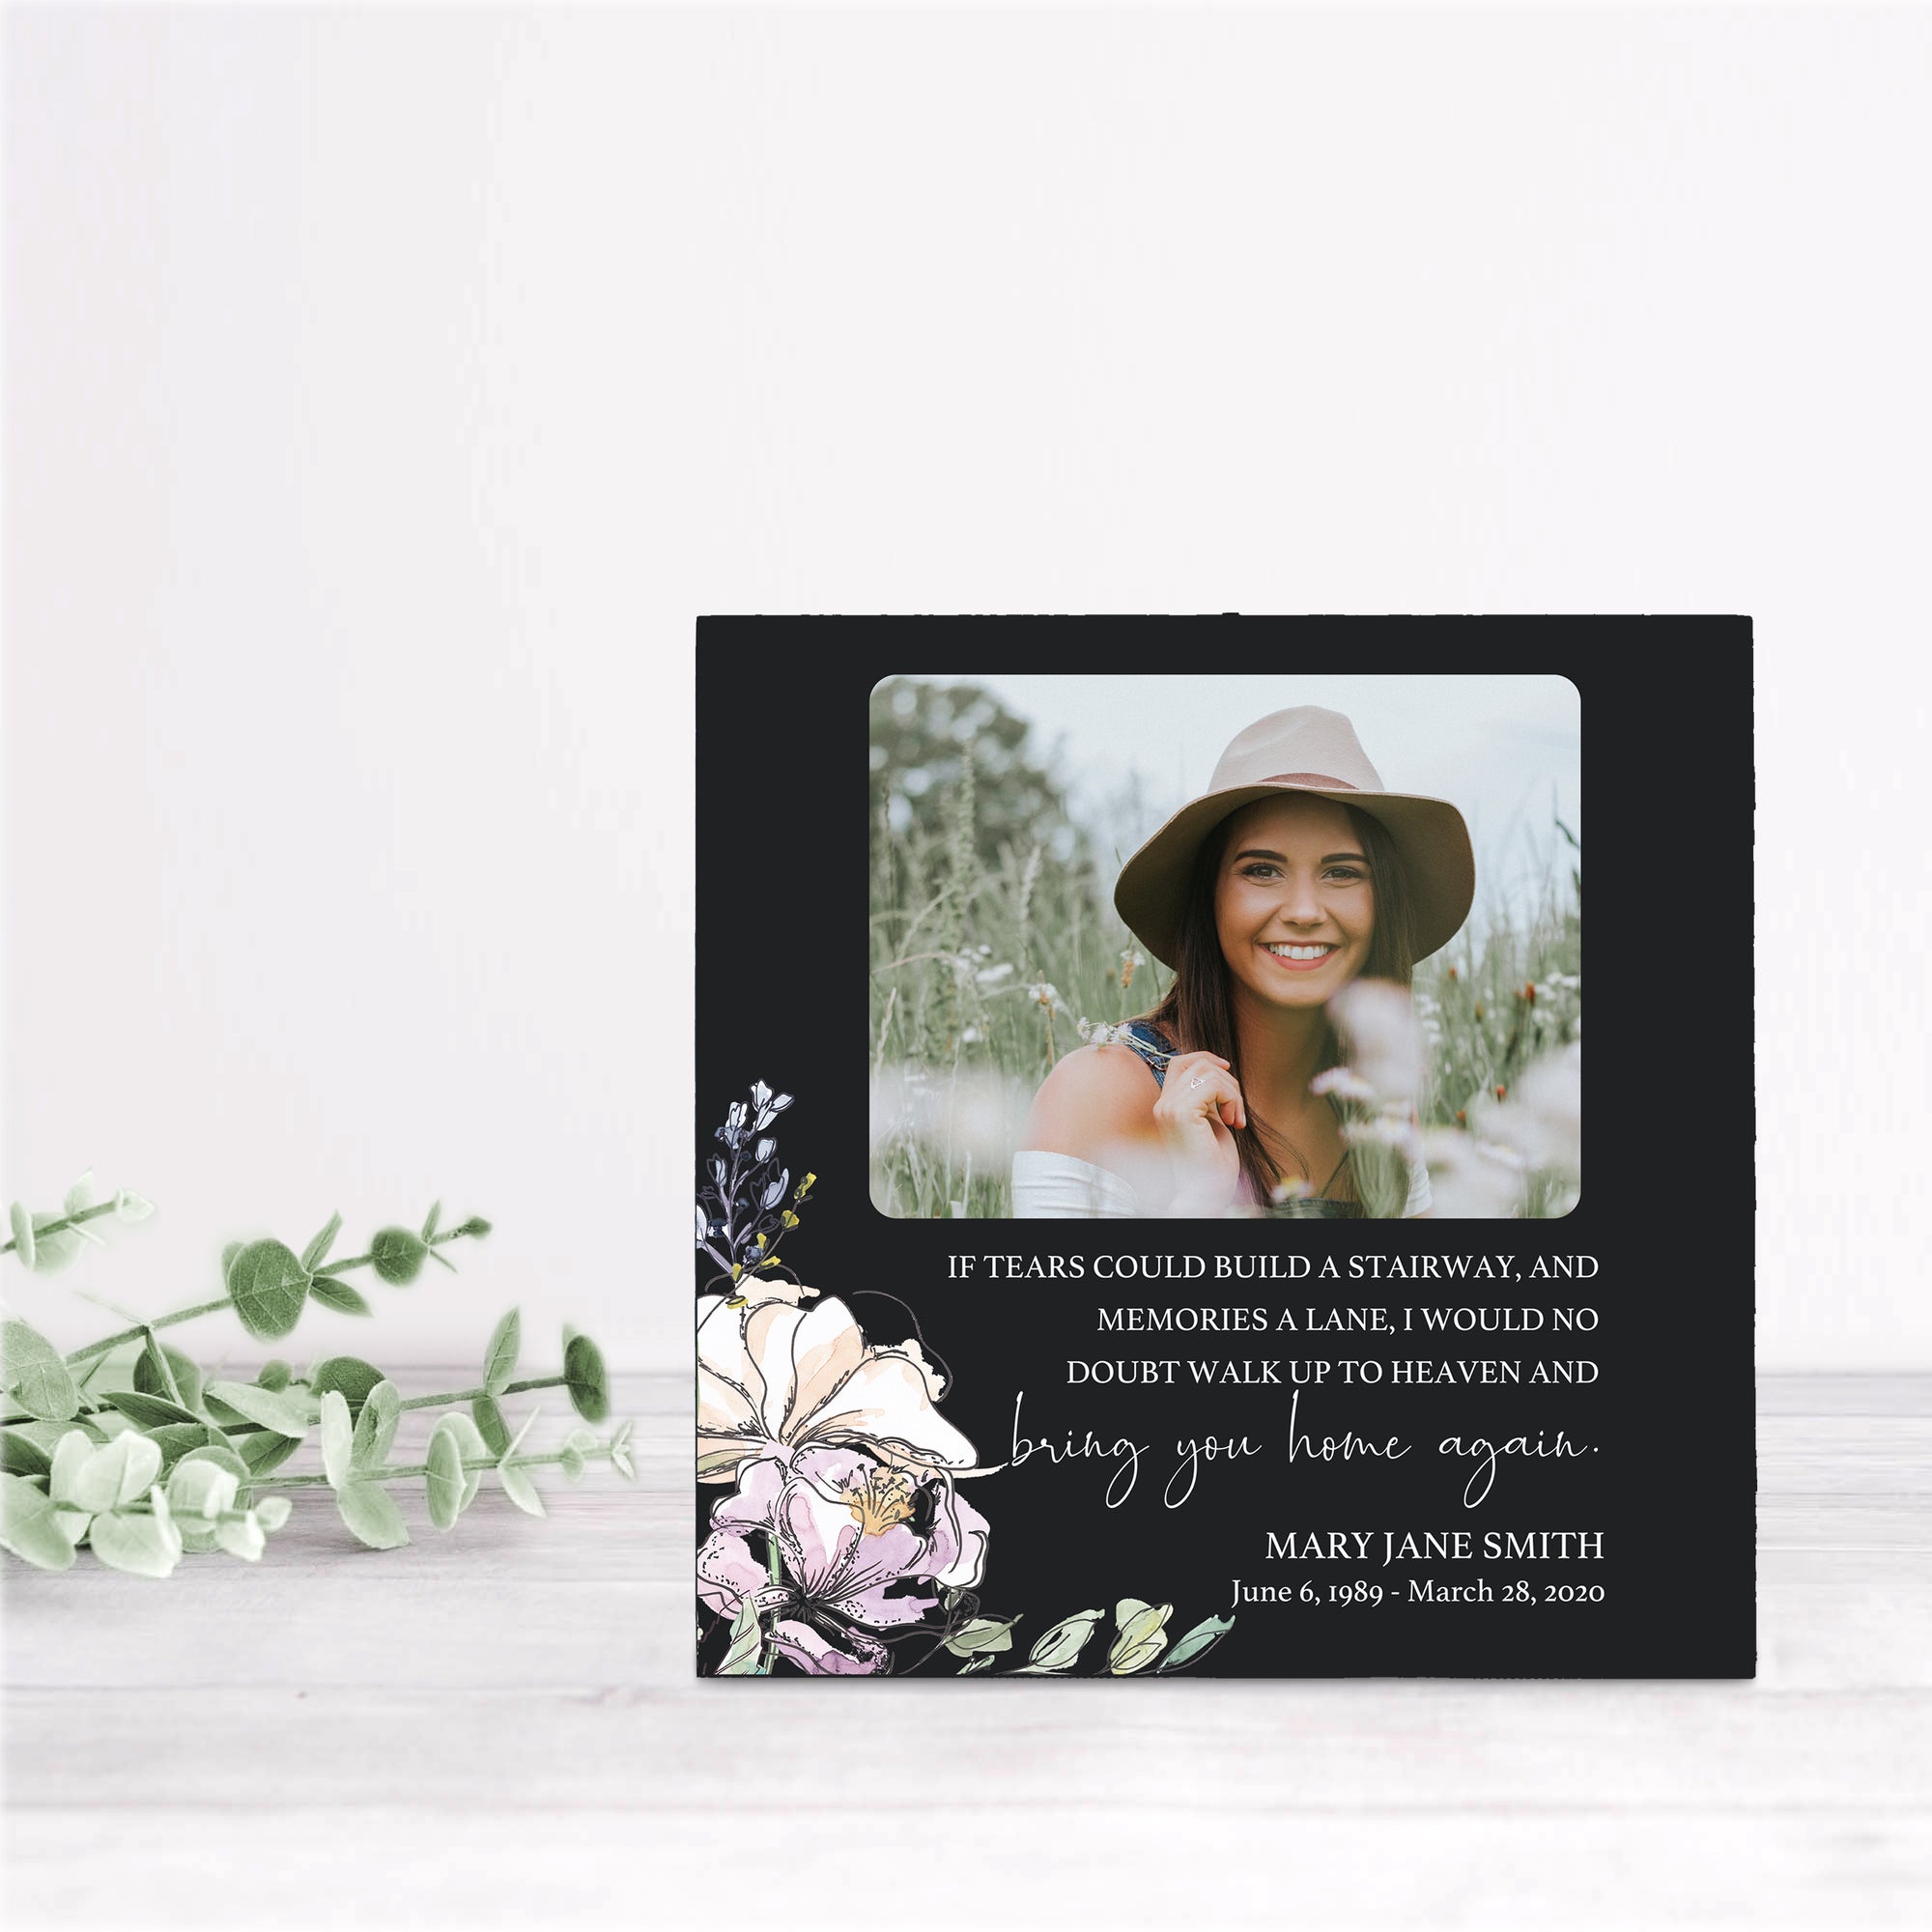 Timeless Human Memorial Shadow Box Photo Urn in Black - If Tears Could Build A Stairway